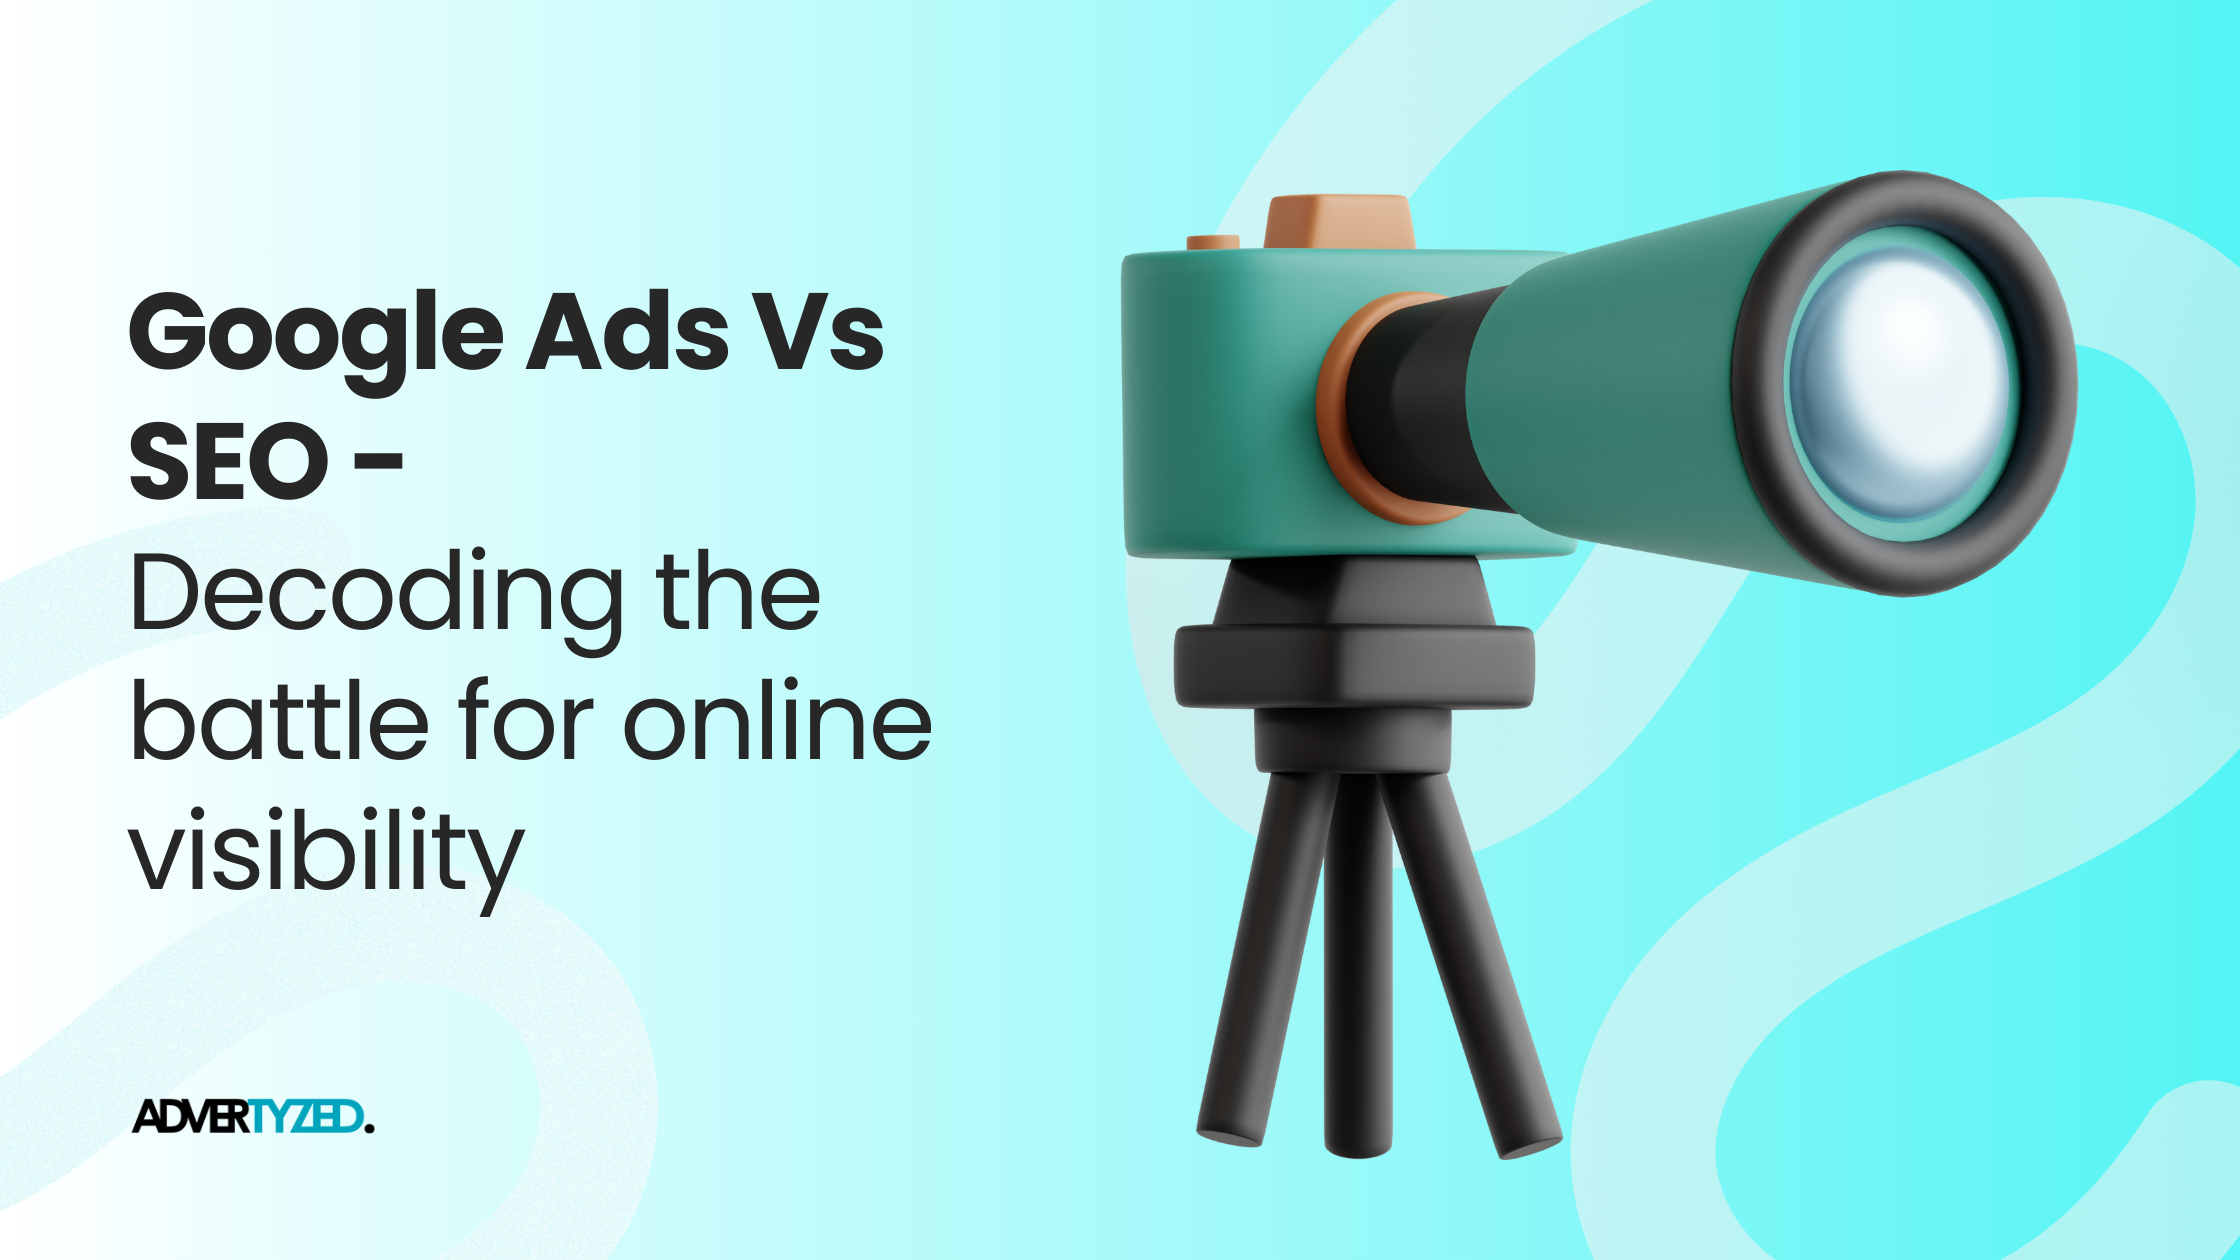 Google Ads VS SEO which is better